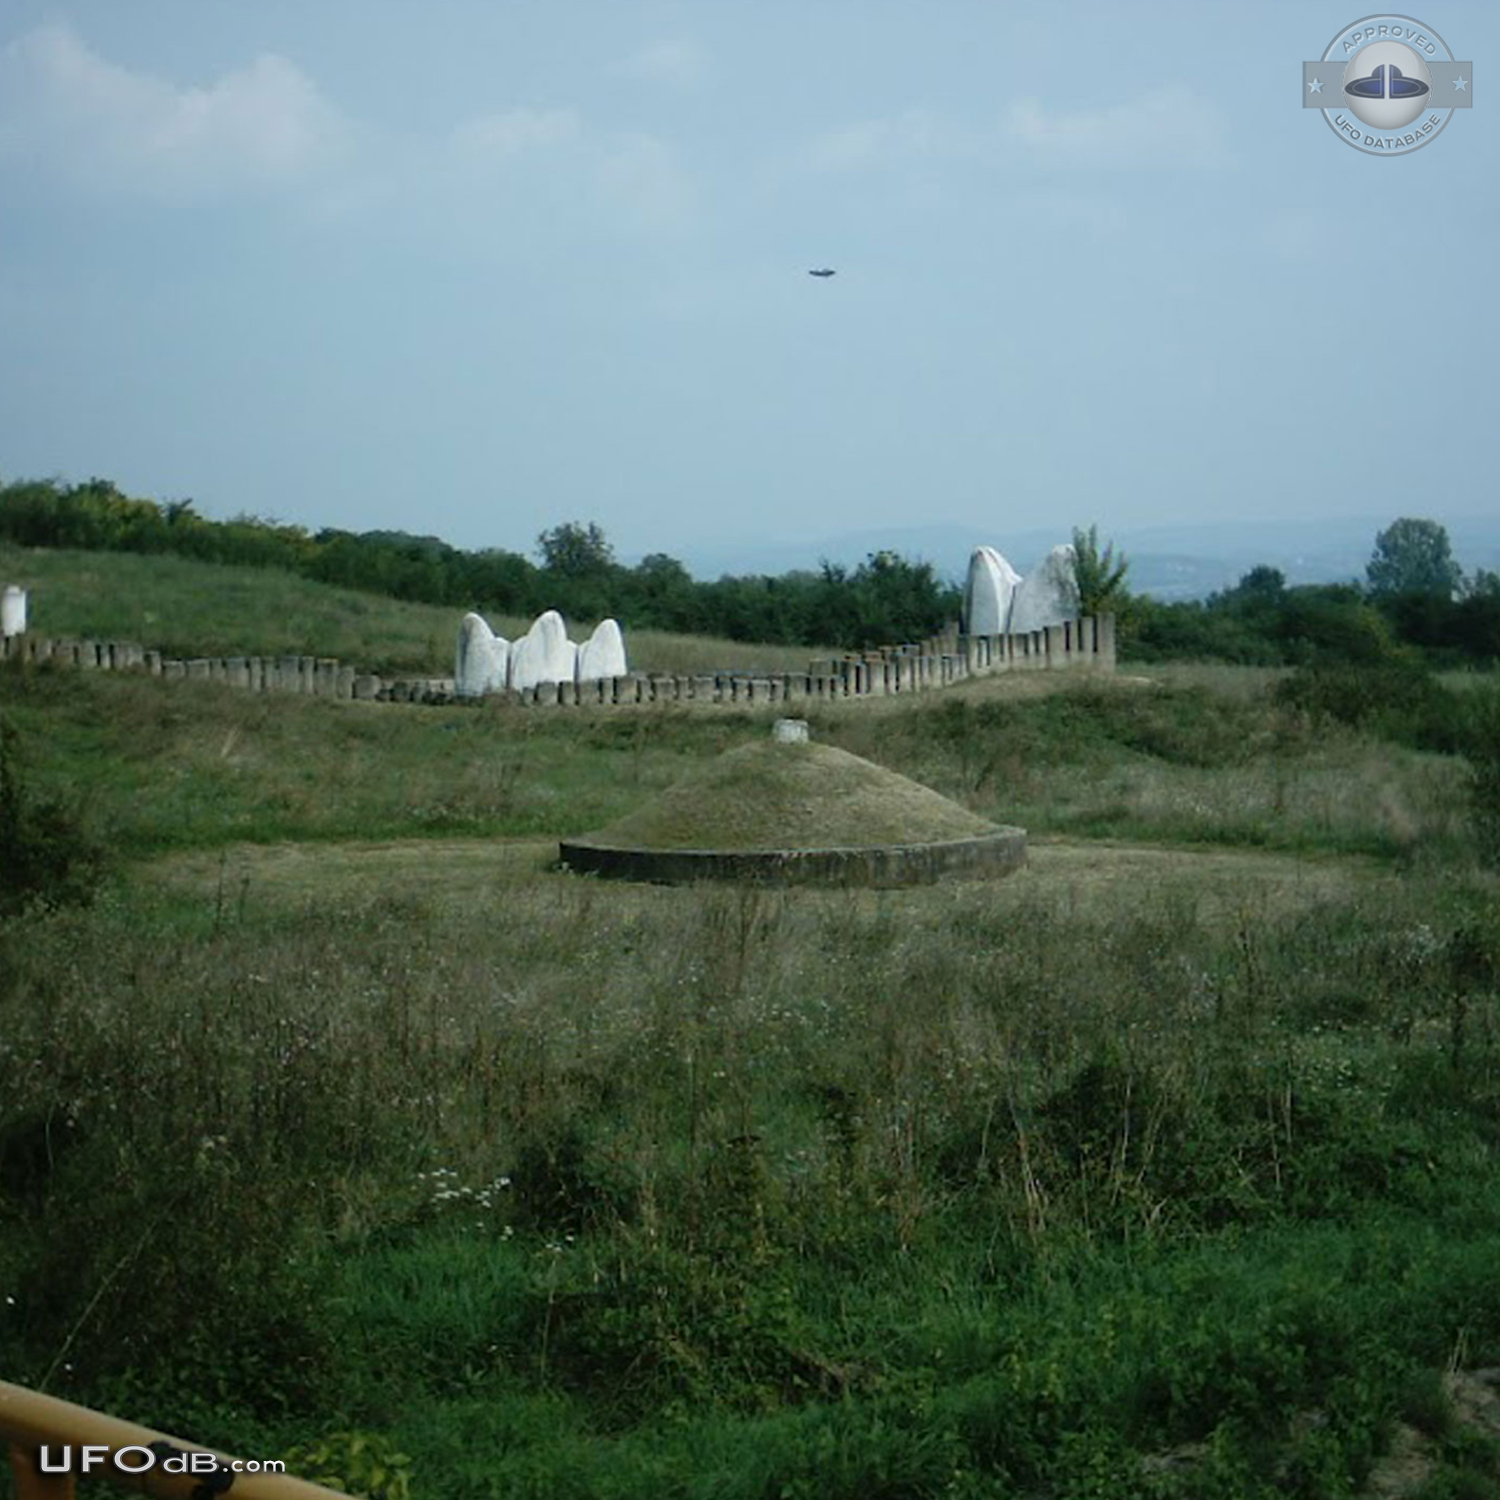 Monument picture reveals passing saucer UFO in Kragujevac, Serbia 2004 UFO Picture #457-2